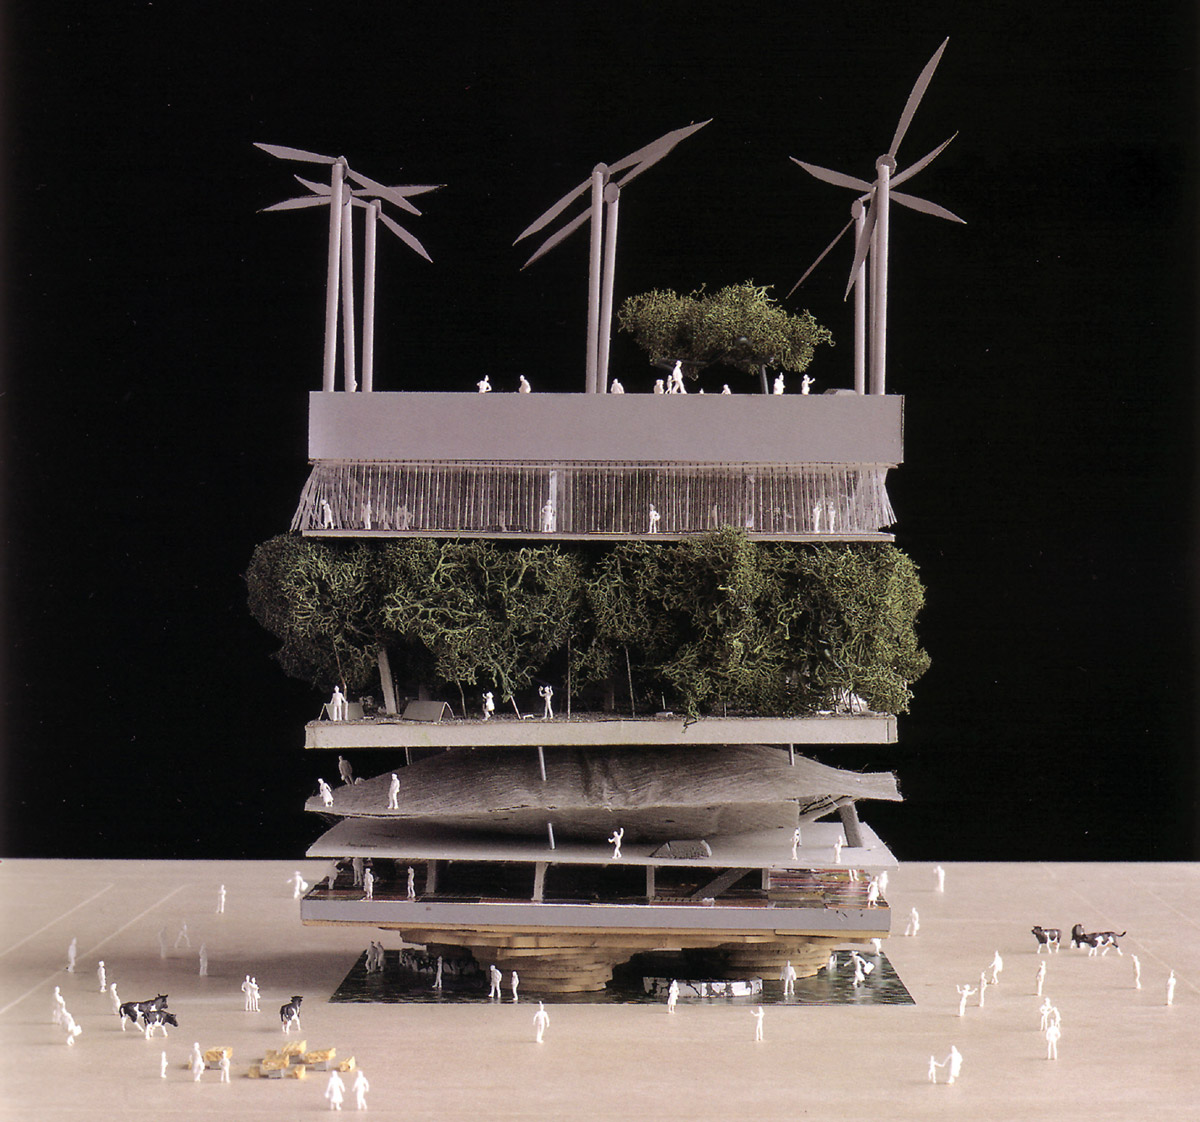 A photograph of a model from the 2000 Hanover Expo of a layered, multimedia building with wind turbines on top by MVRDV, entitled Dutch Pavilion.